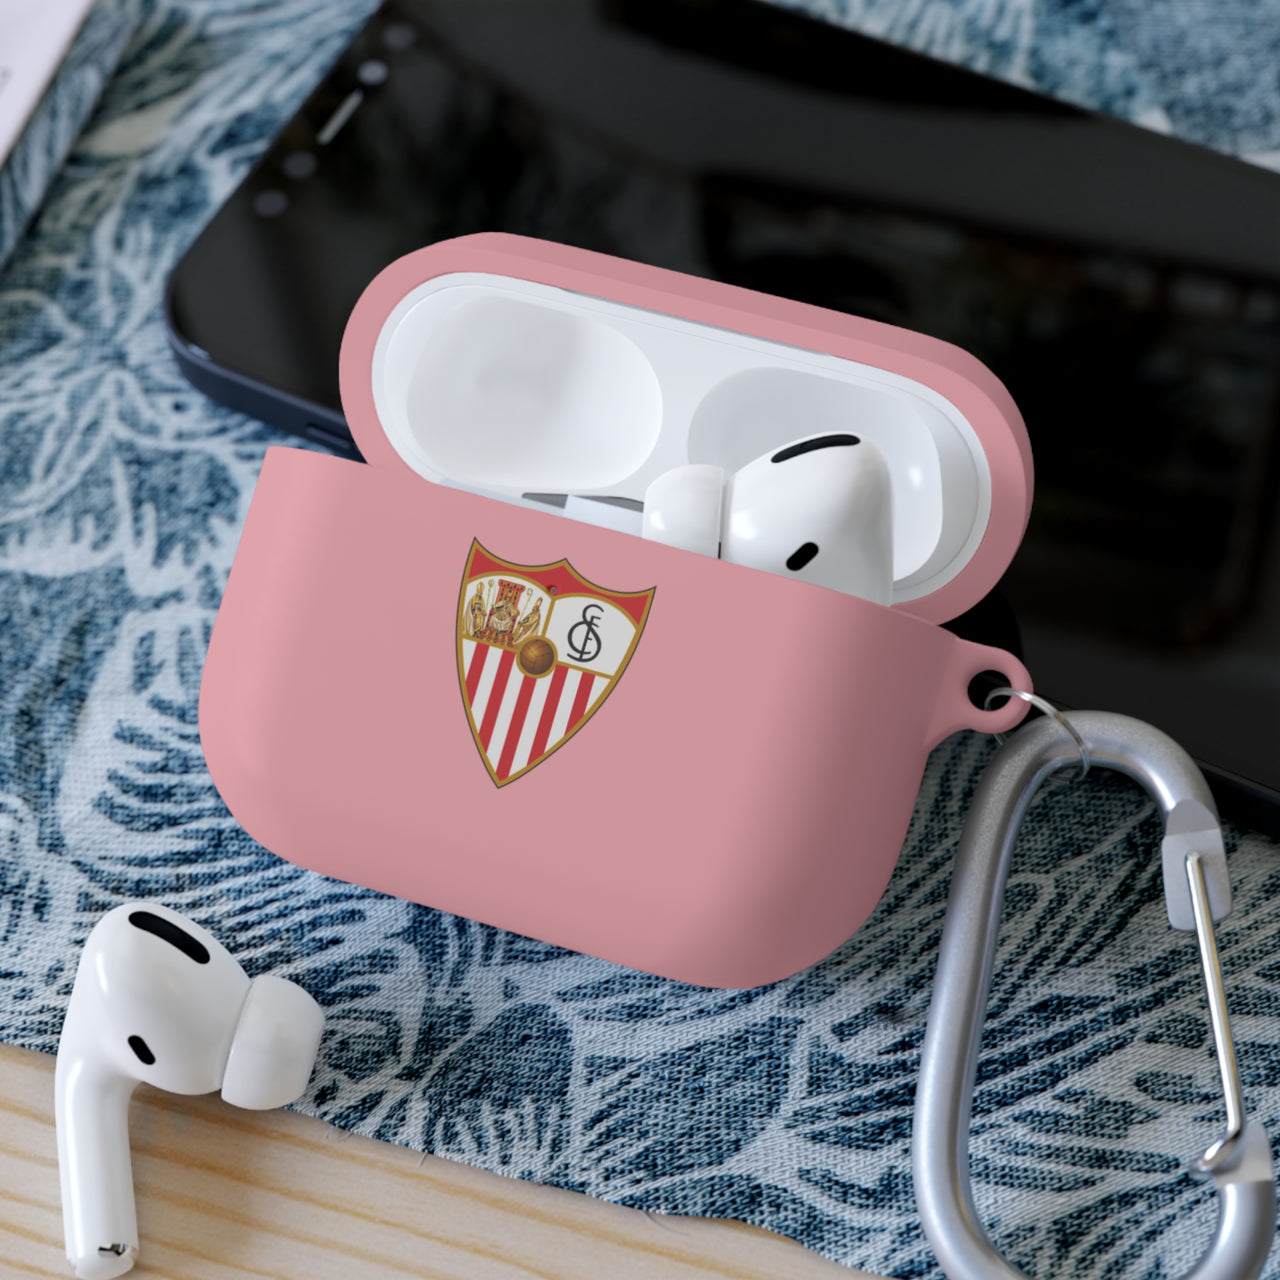 Sevilla AirPods and AirPods Pro Case Cover